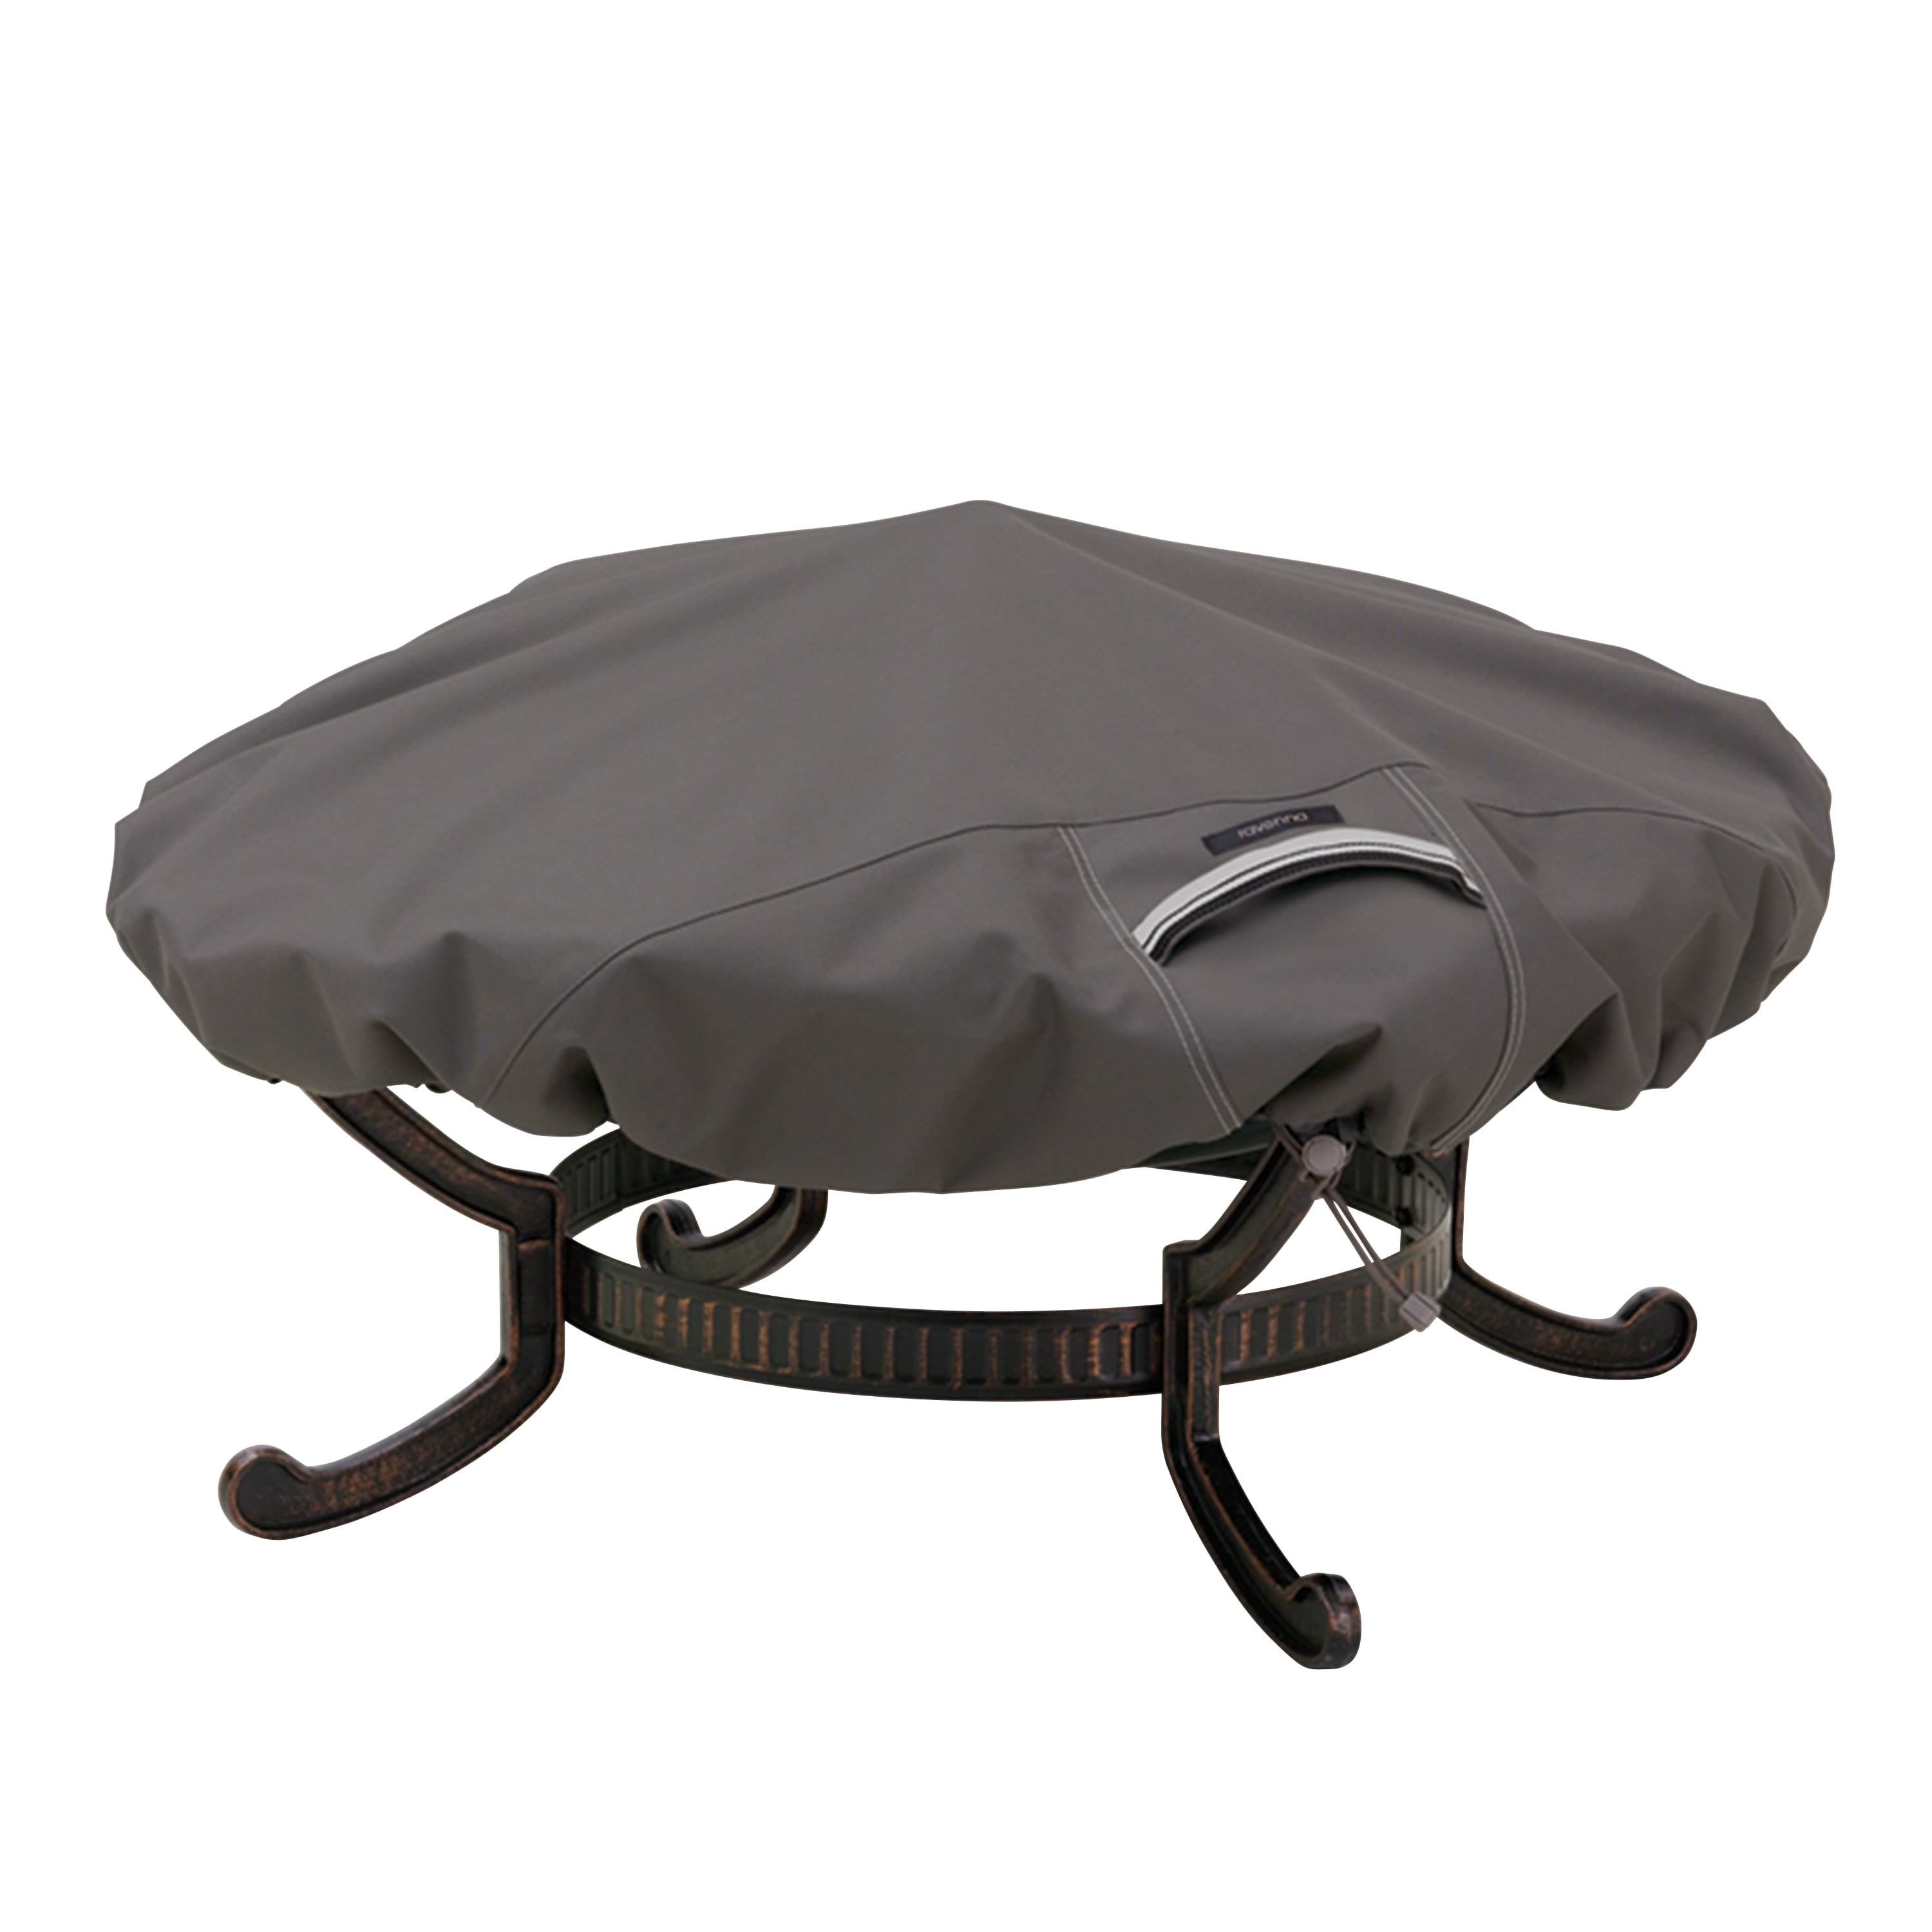 Durable Weather-Resistant Round Fire Pit Cover Outdoor Waterproof Black 30 Inch 